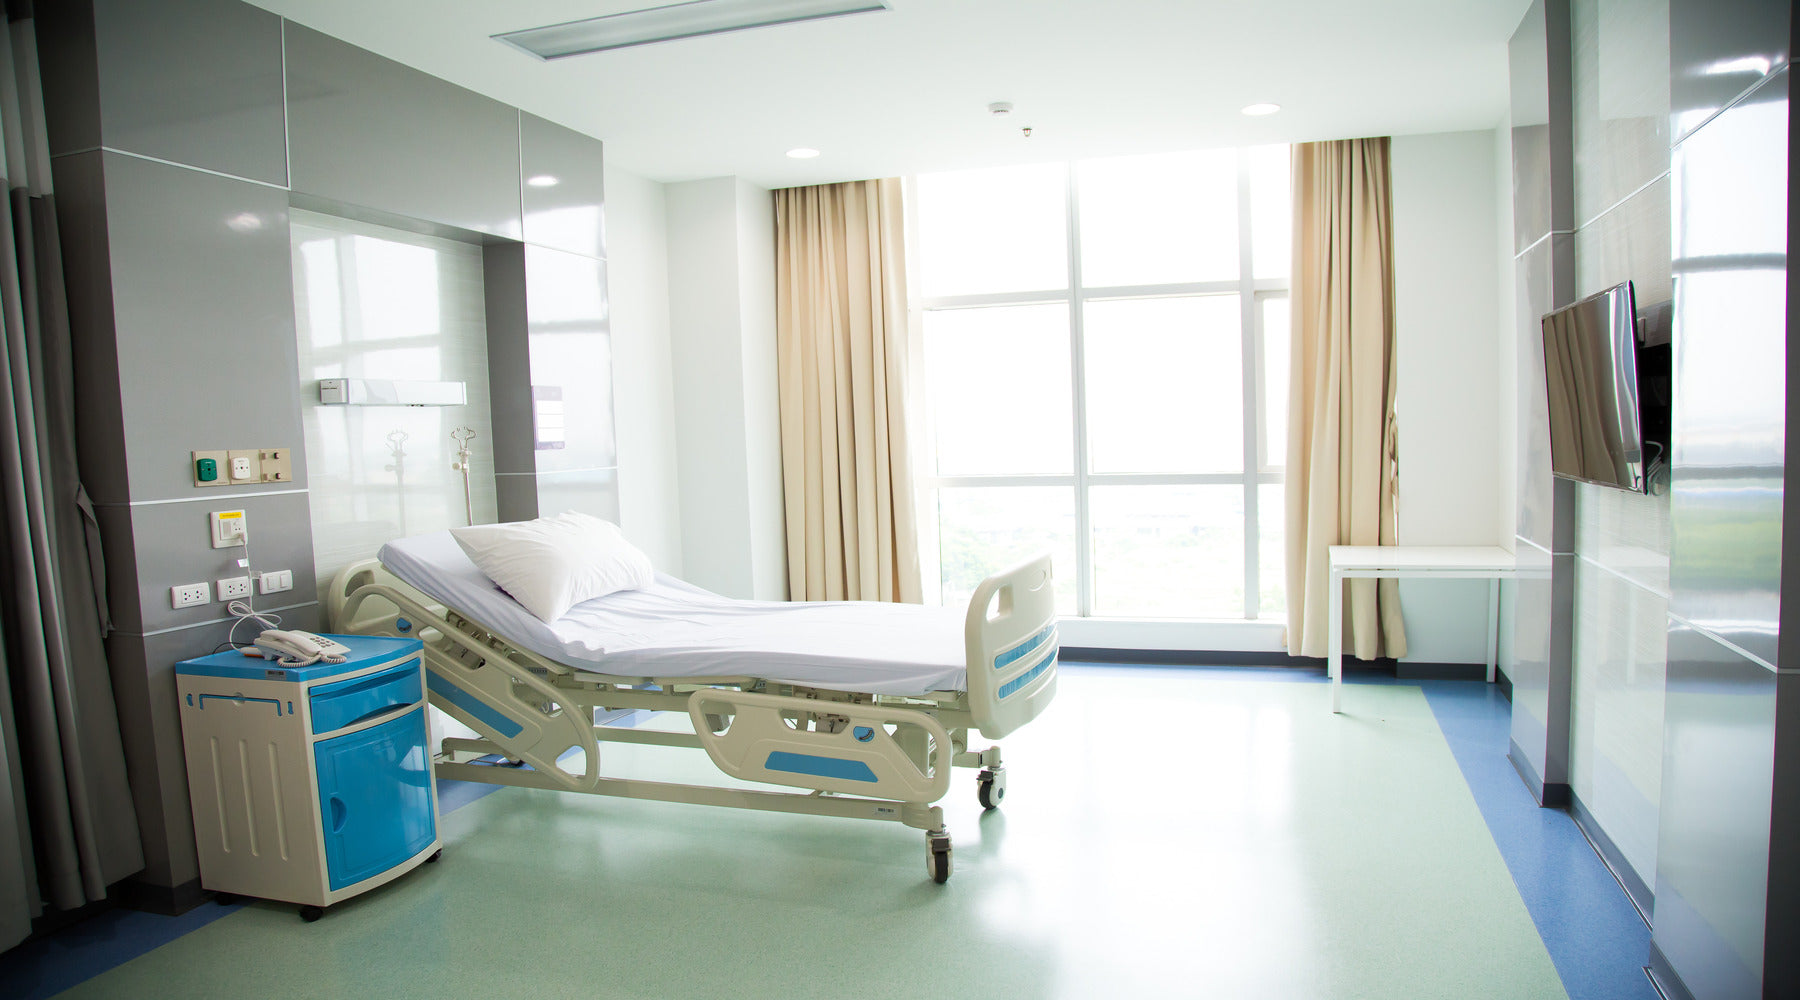 Hospital recovery room with beds illuminated by recessed ceiling lights